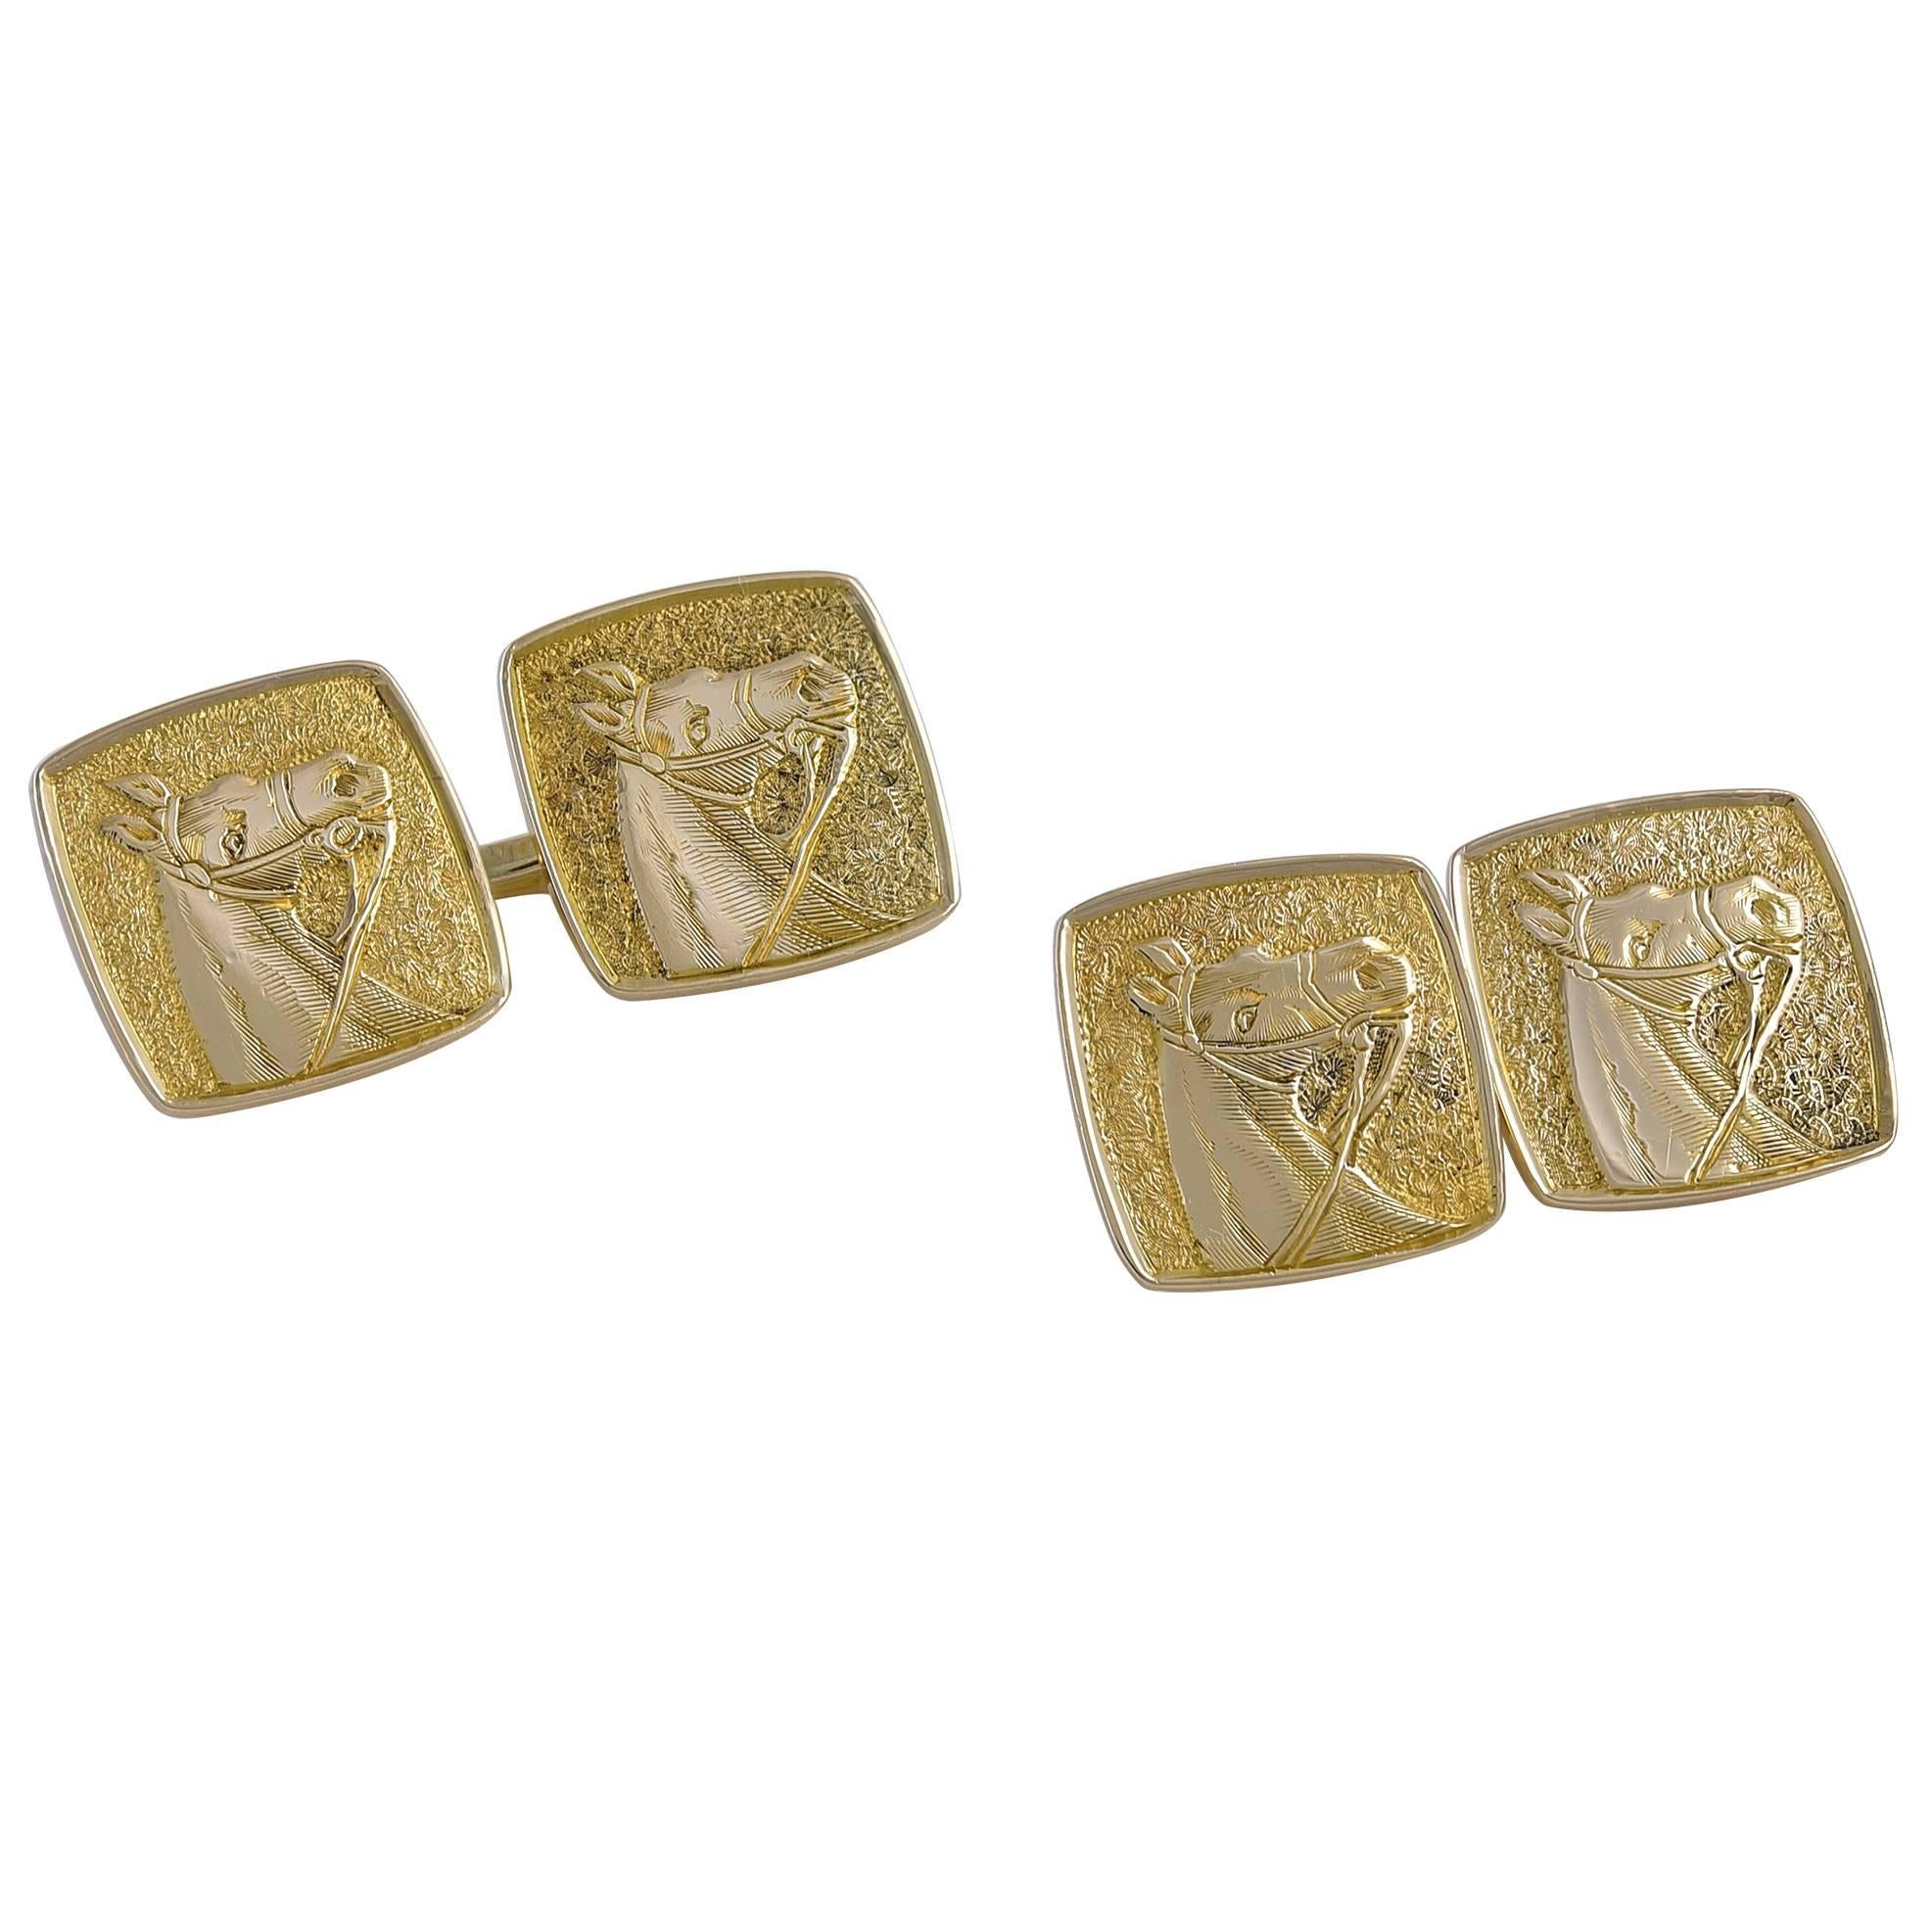 Tiffany & Co. Gold Horse Cufflinks For Sale